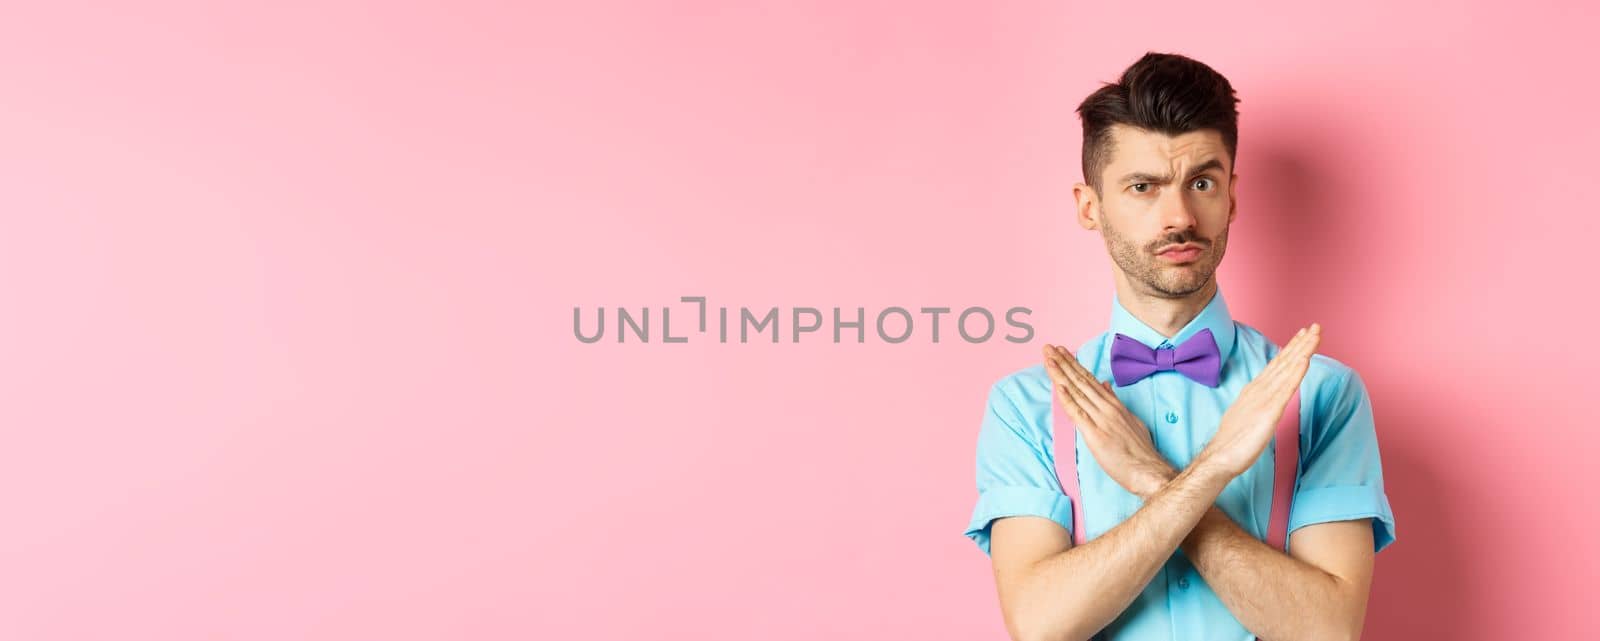 Serious-looking skeptical guy showing cross sign to stop, prohibit something bad, forbid action, standing on pink background. Copy space